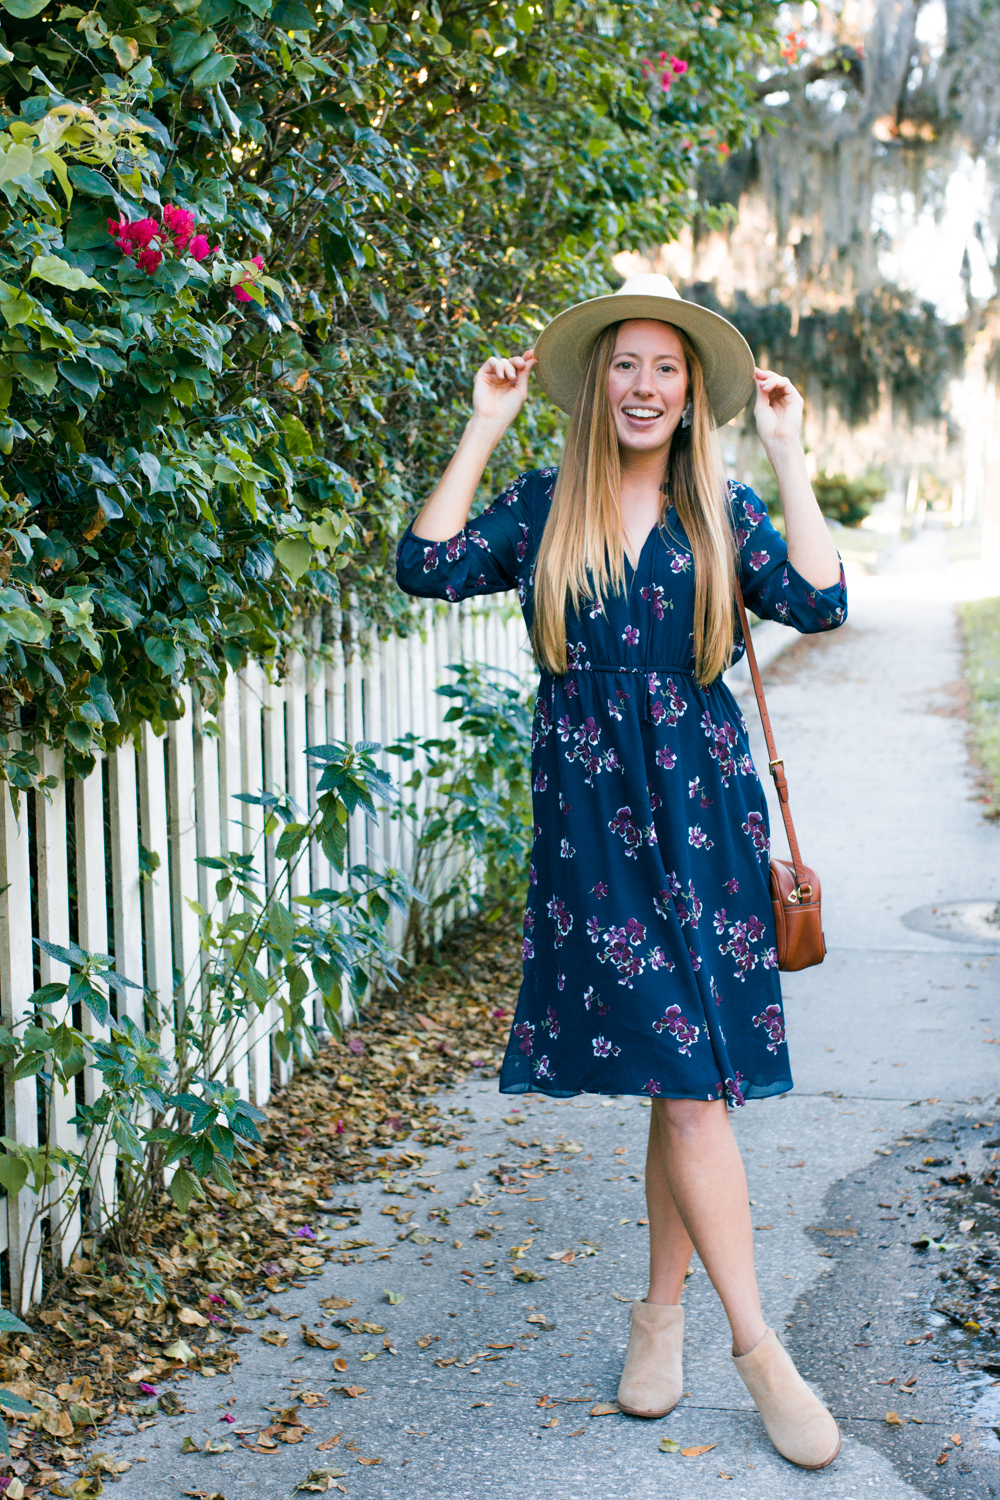 What to Wear in Florida in January / What to Wear in Florida In Dec / What to Wear in Florida During the Winter / Blue Floral Midi Dress // Long Sleeve Midi Dress with Ankle Boots / J.Crew Leather Bag / Panama Hat / Midi Dress for Work / More on www.thesunshinestyle.com